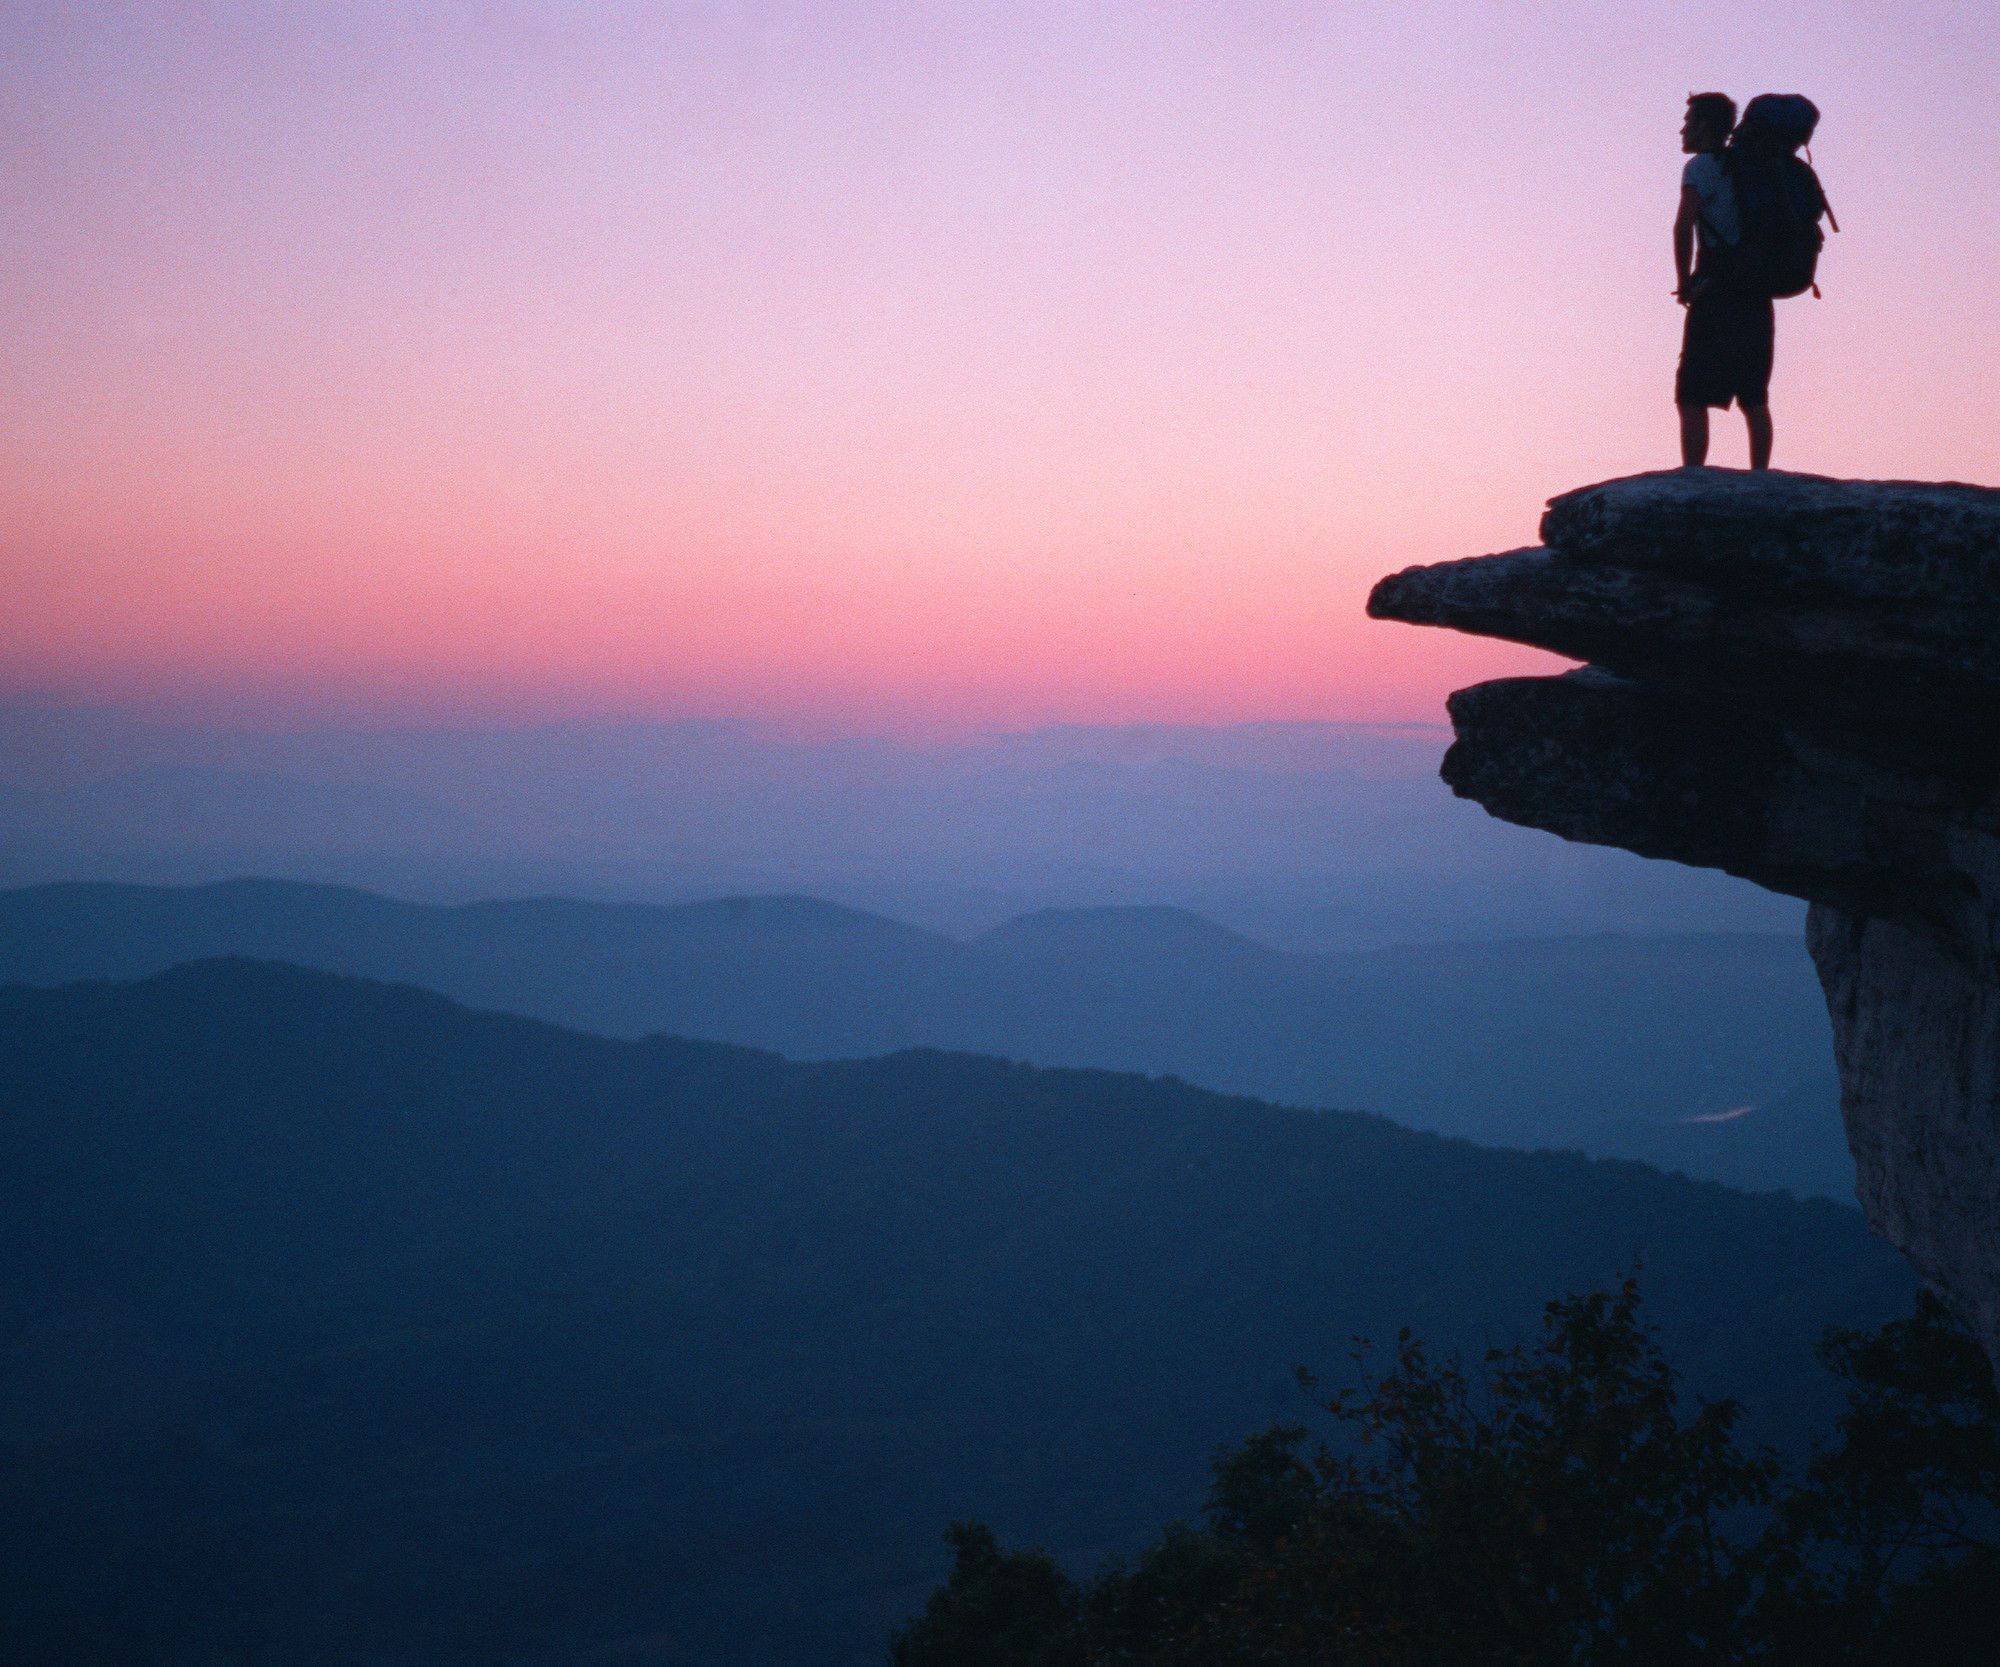 McAfee Knob is one of the most popular locations along the A.T. to take photographs.